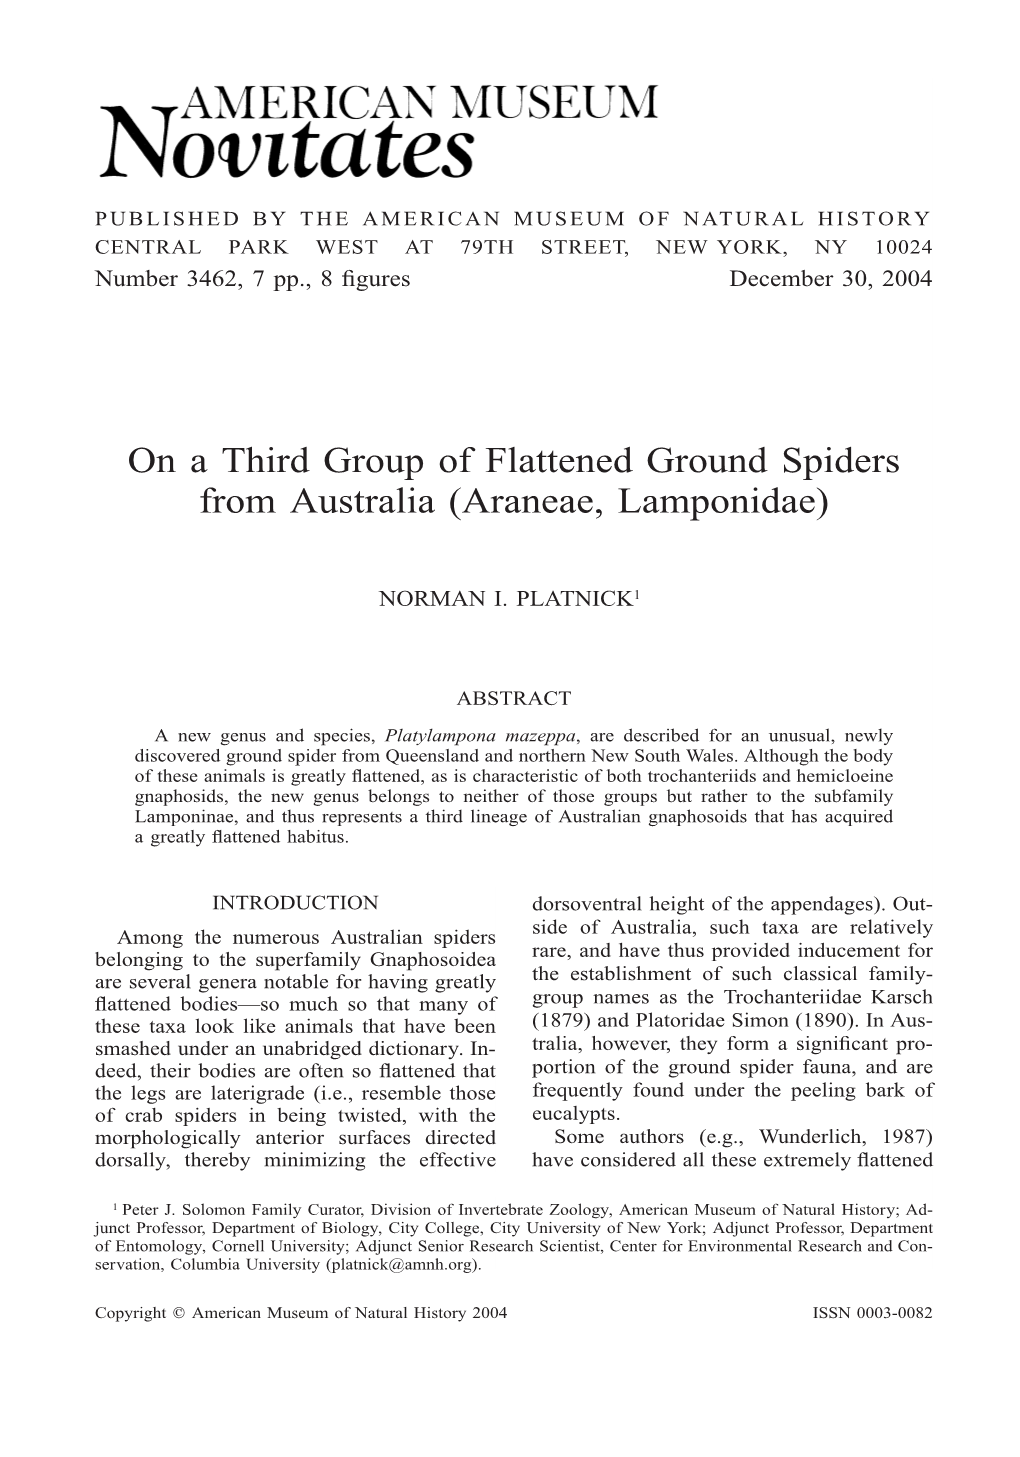 On a Third Group of Flattened Ground Spiders from Australia (Araneae, Lamponidae)